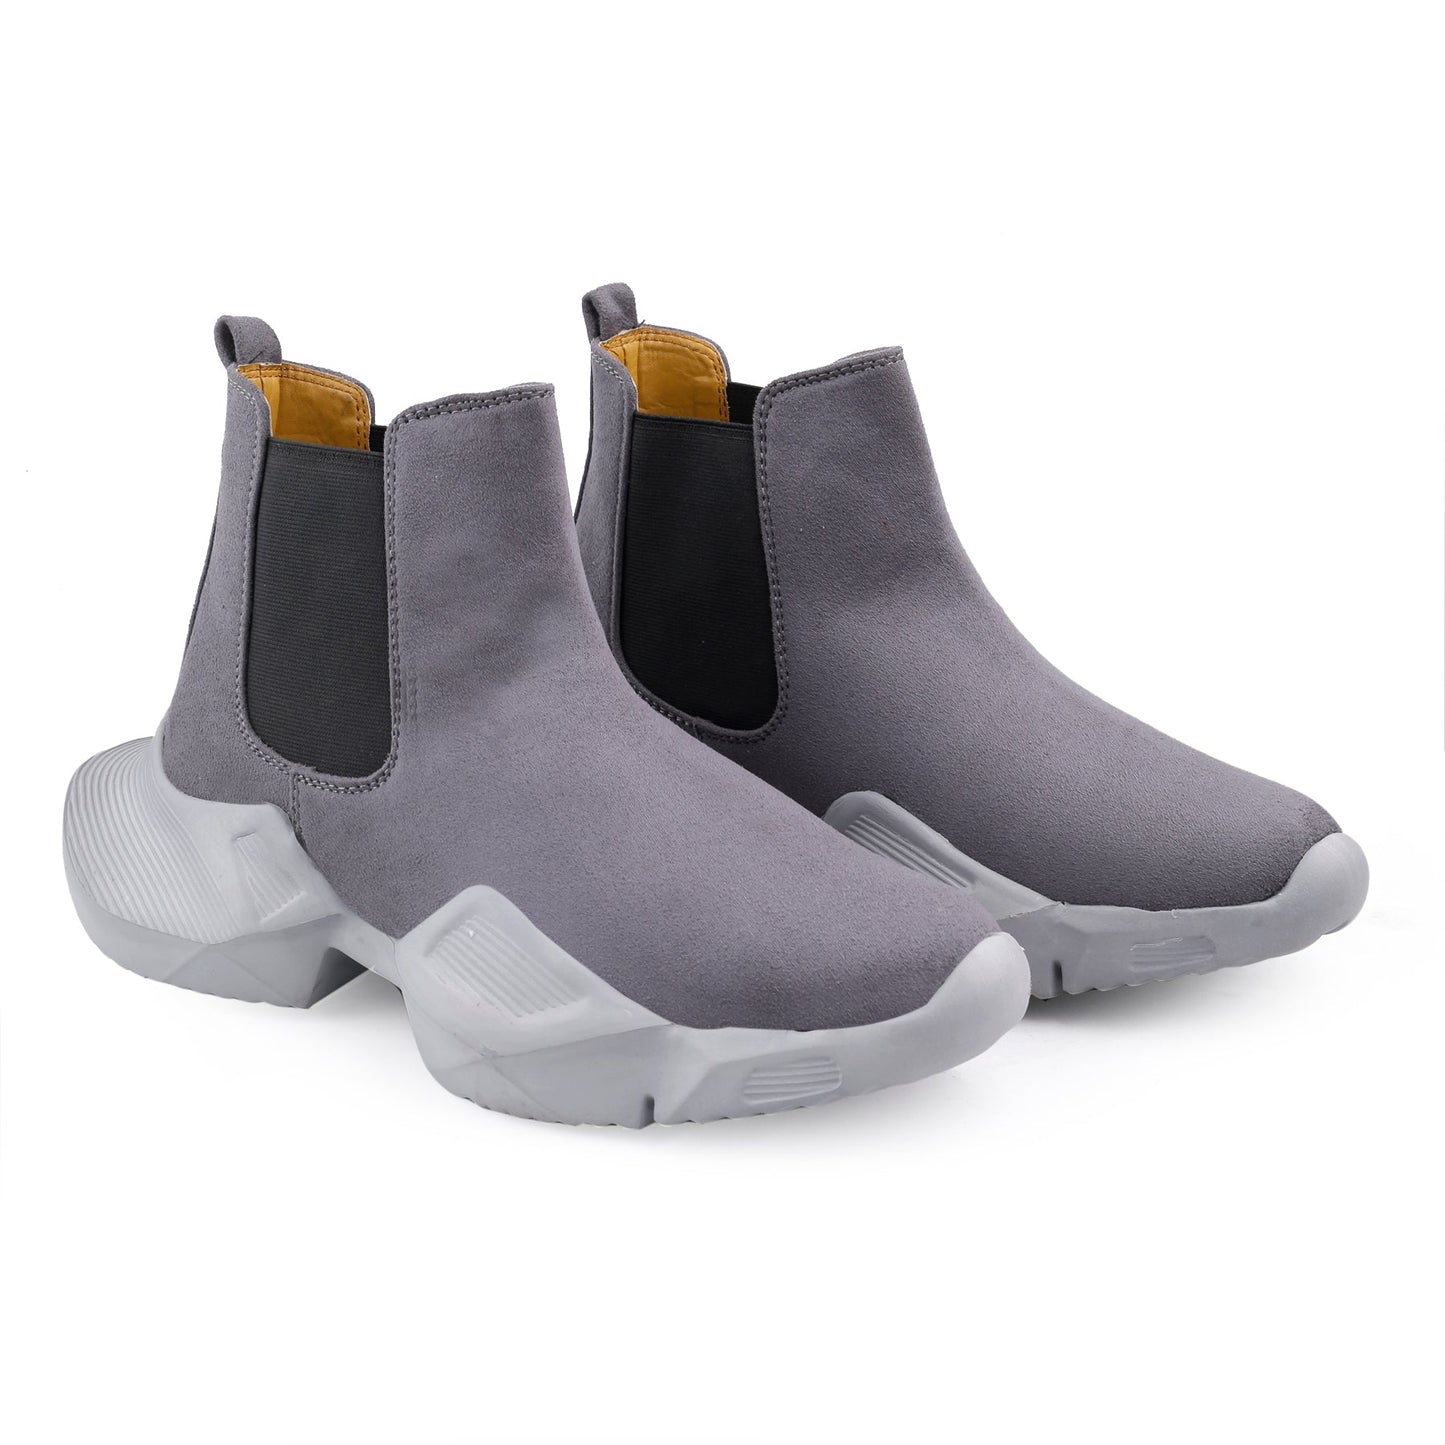 Bxxy's High-end Fashionable Chelsea Boots for Men